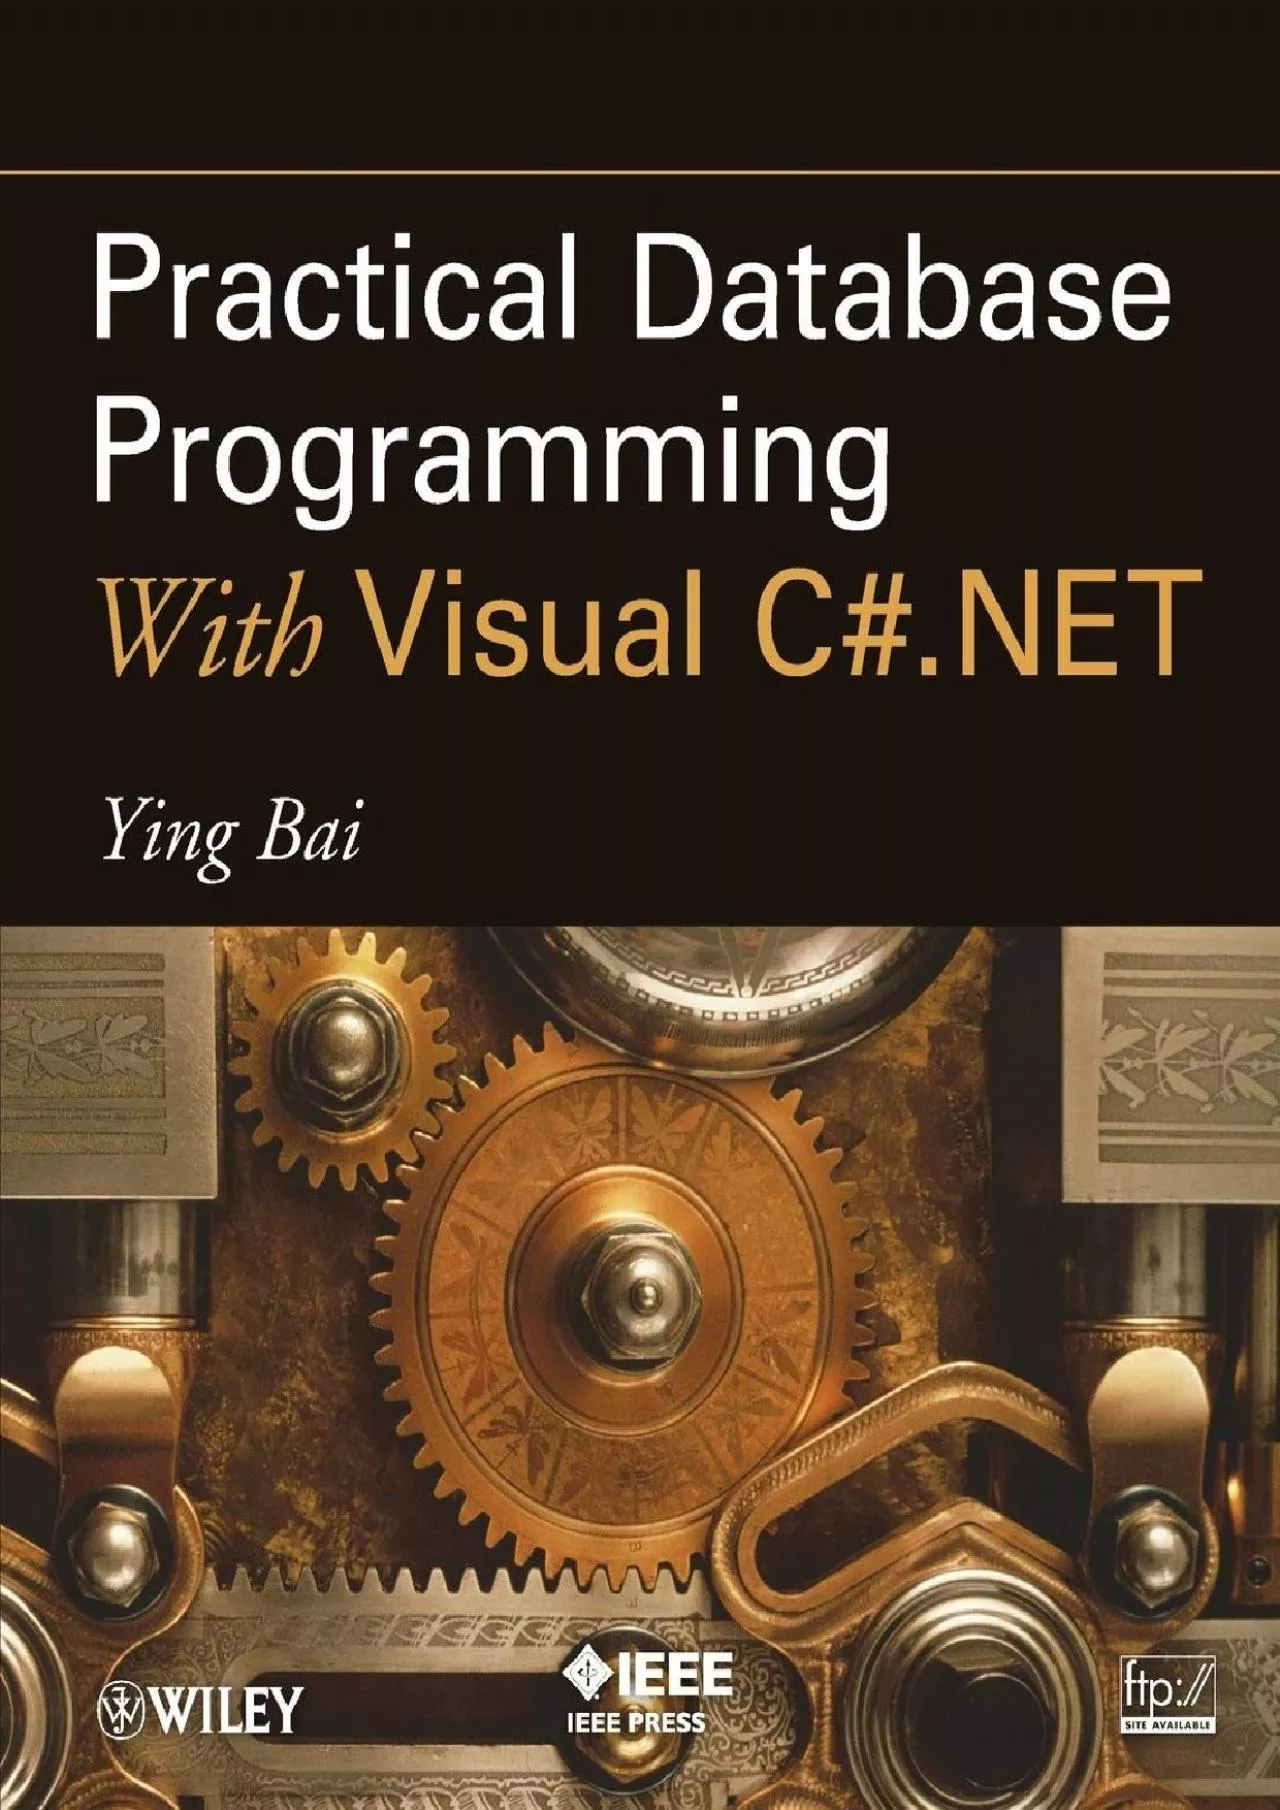 [READING BOOK]-Practical Database Programming With Visual C.NET